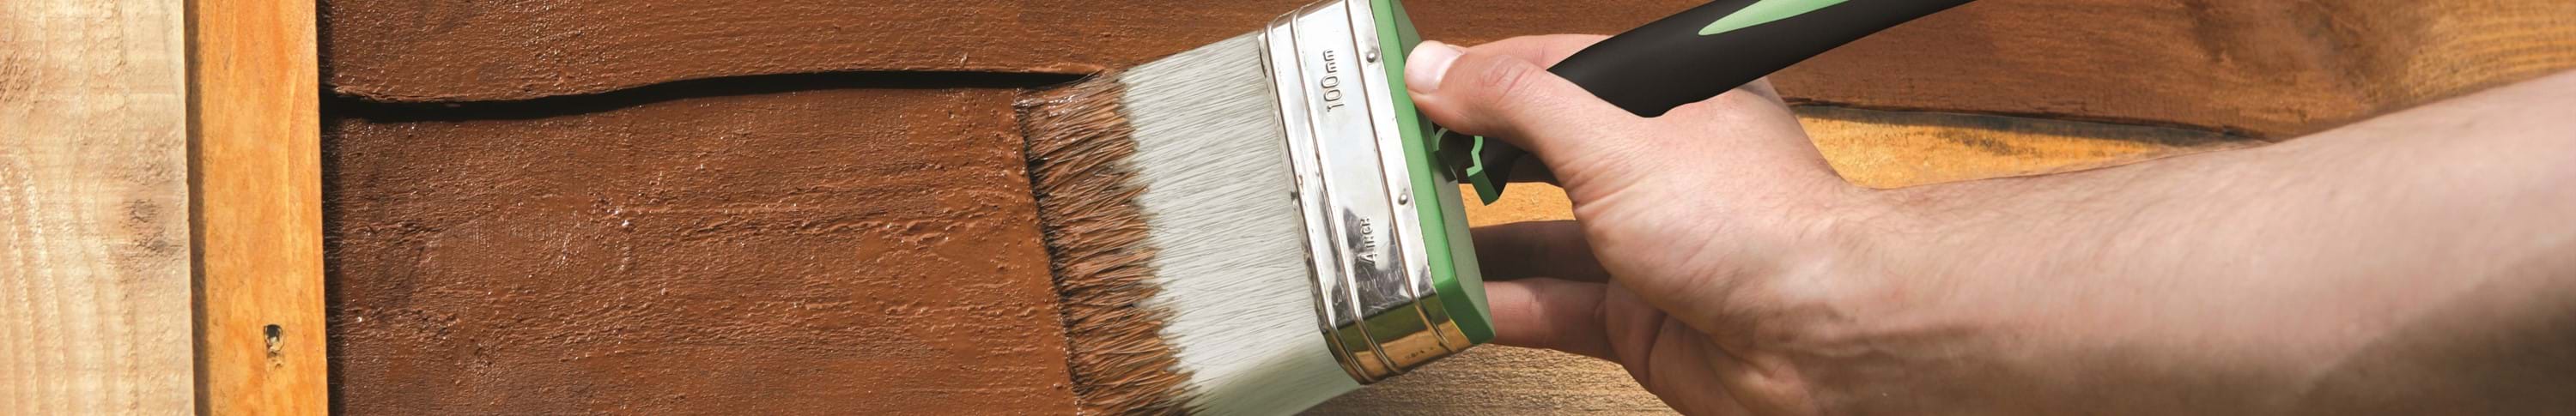 Trade Fencing Stain_8533_Brushing Fence Life Softgrip.jpg